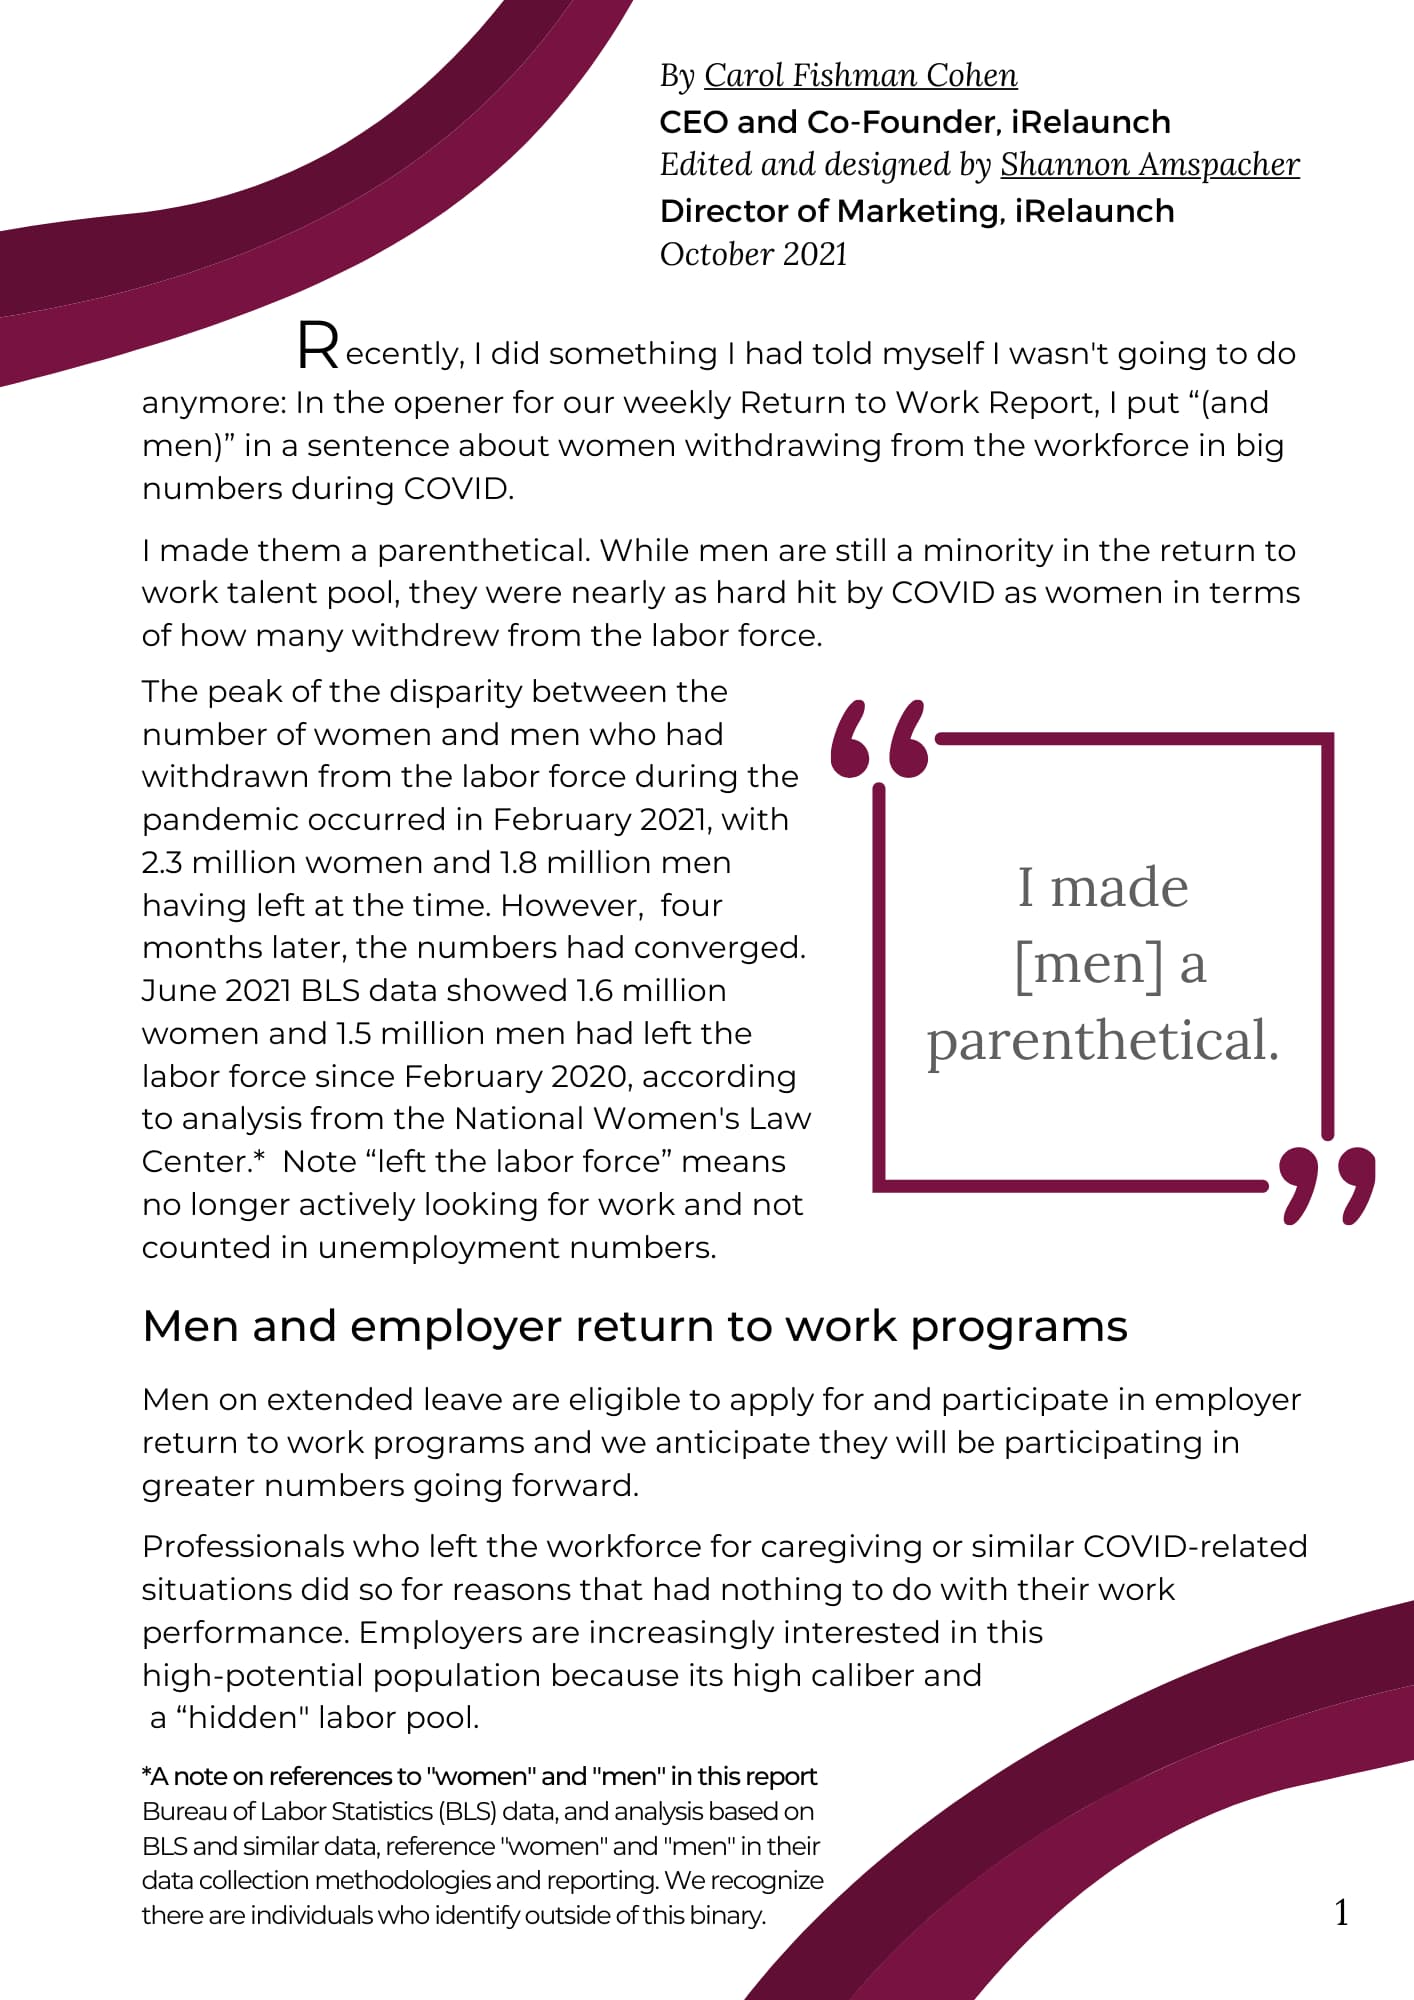 Men Who Relaunch White Paper Excerpt